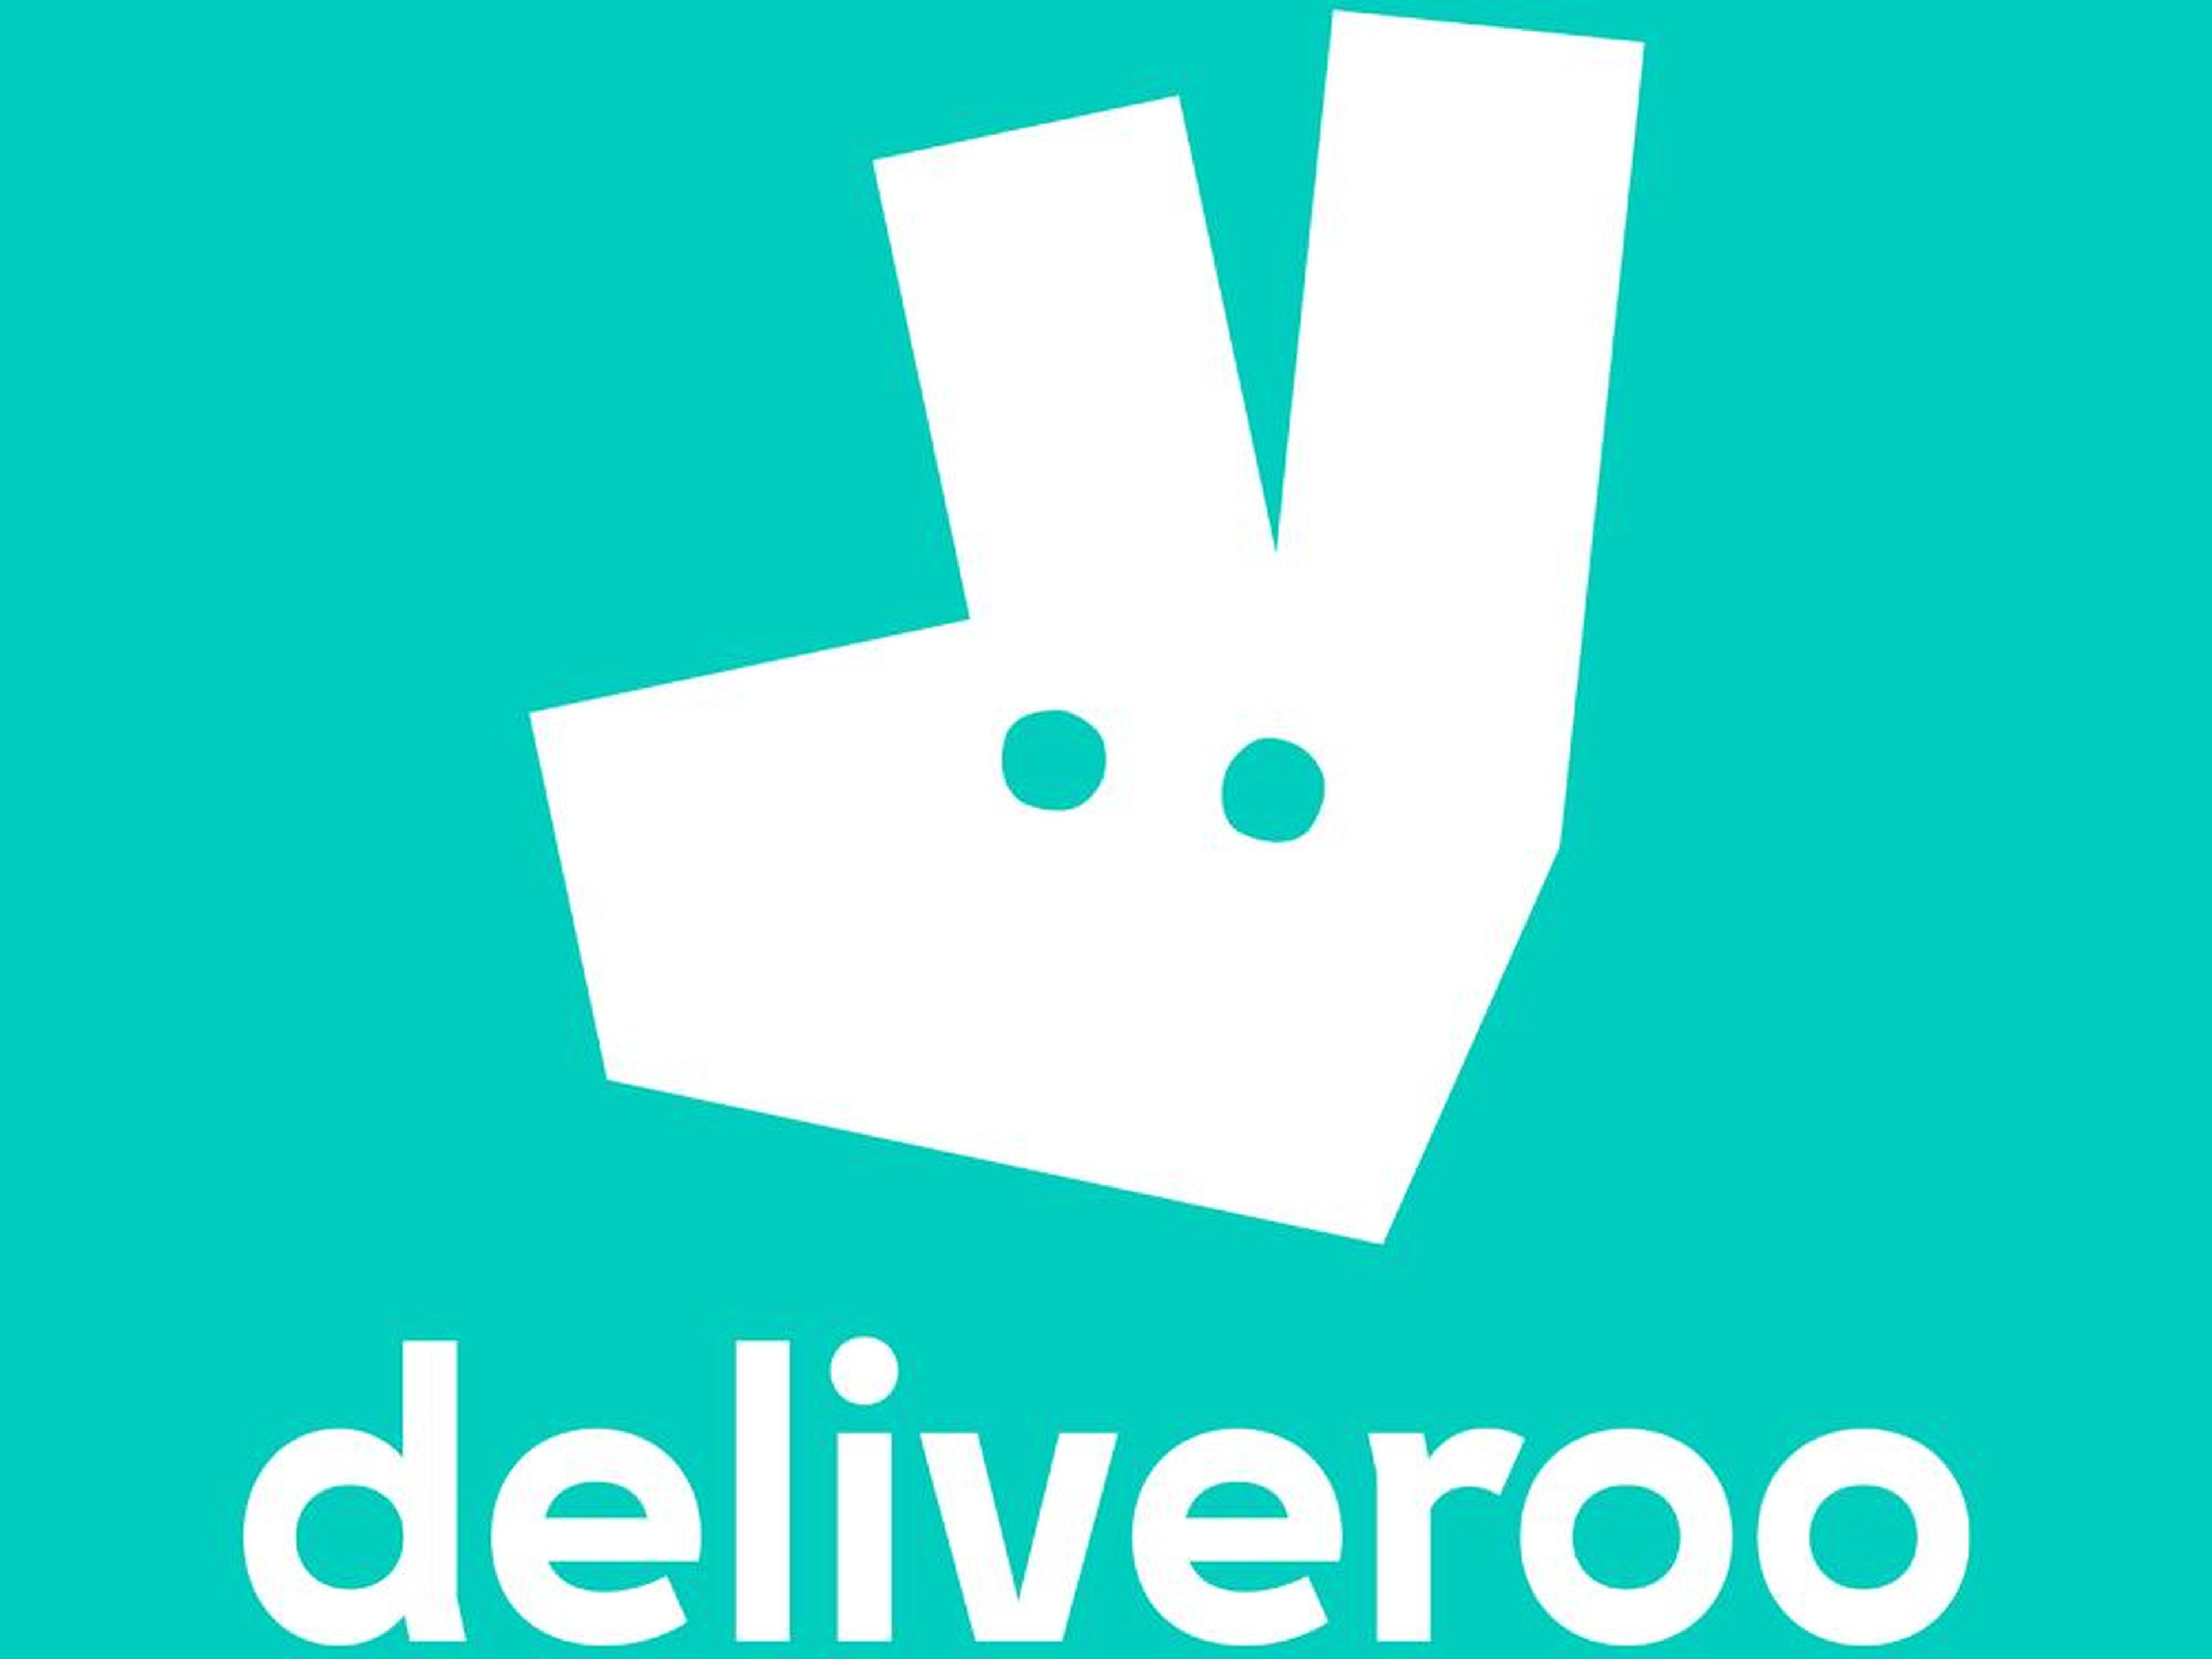 The new geometric Deliveroo logo, which is still intended to portray a kangaroo.